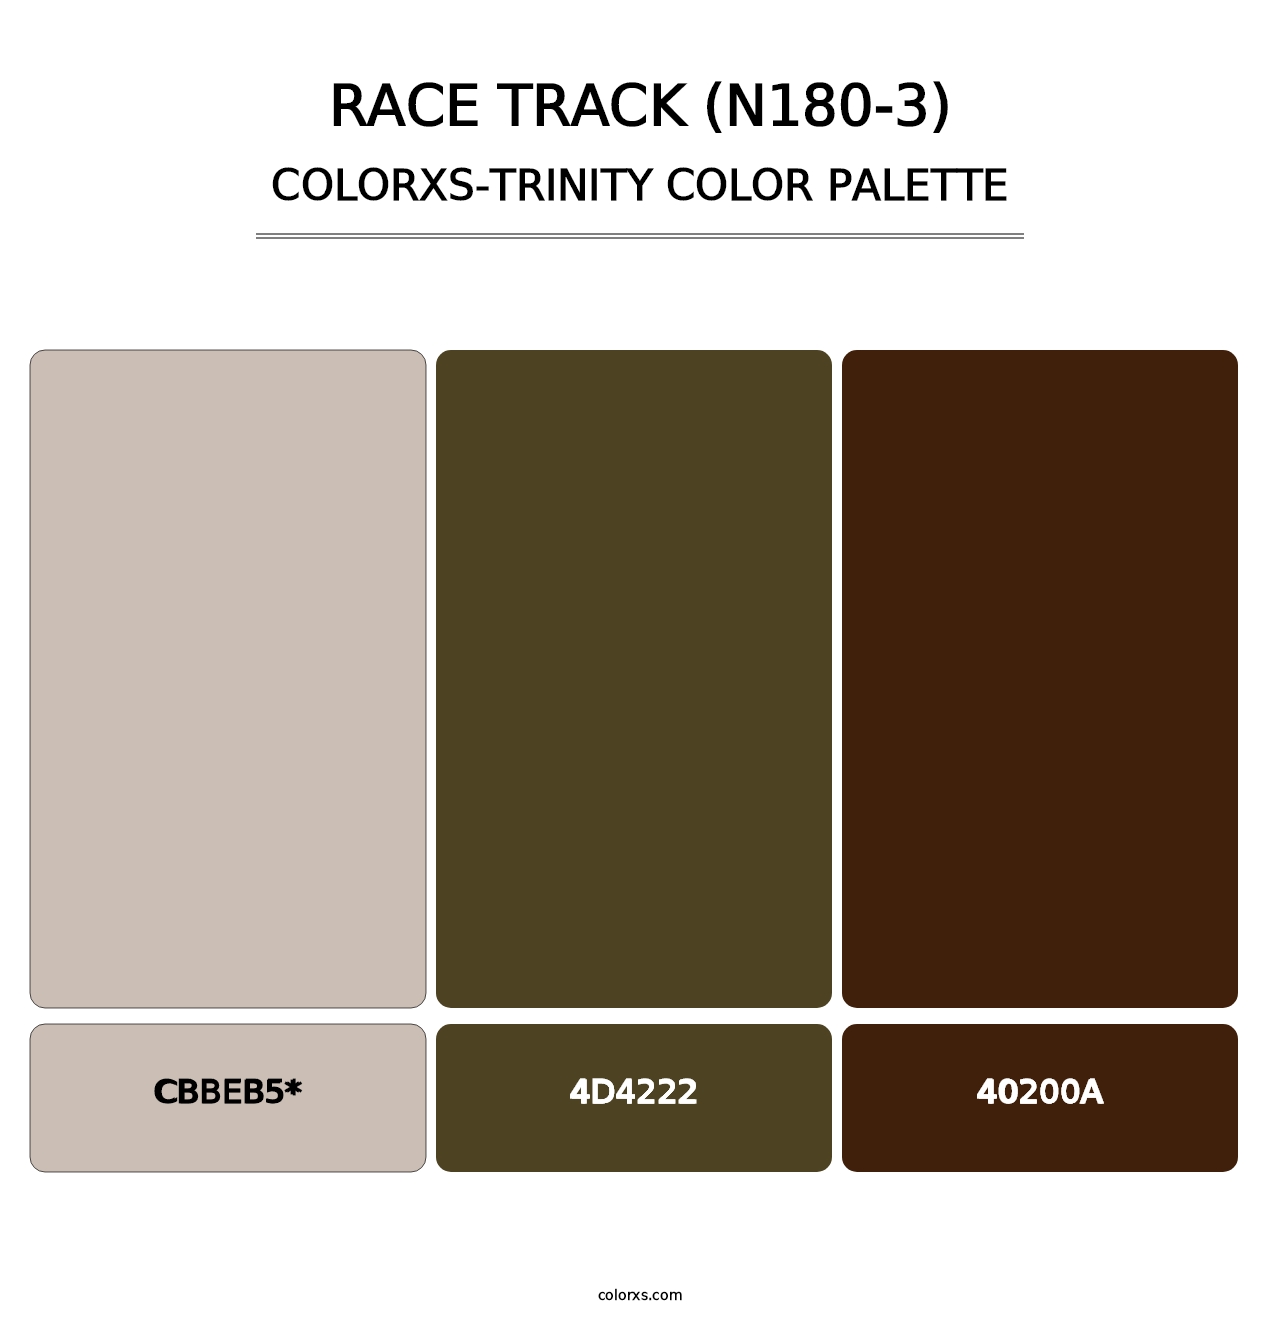 Race Track (N180-3) - Colorxs Trinity Palette